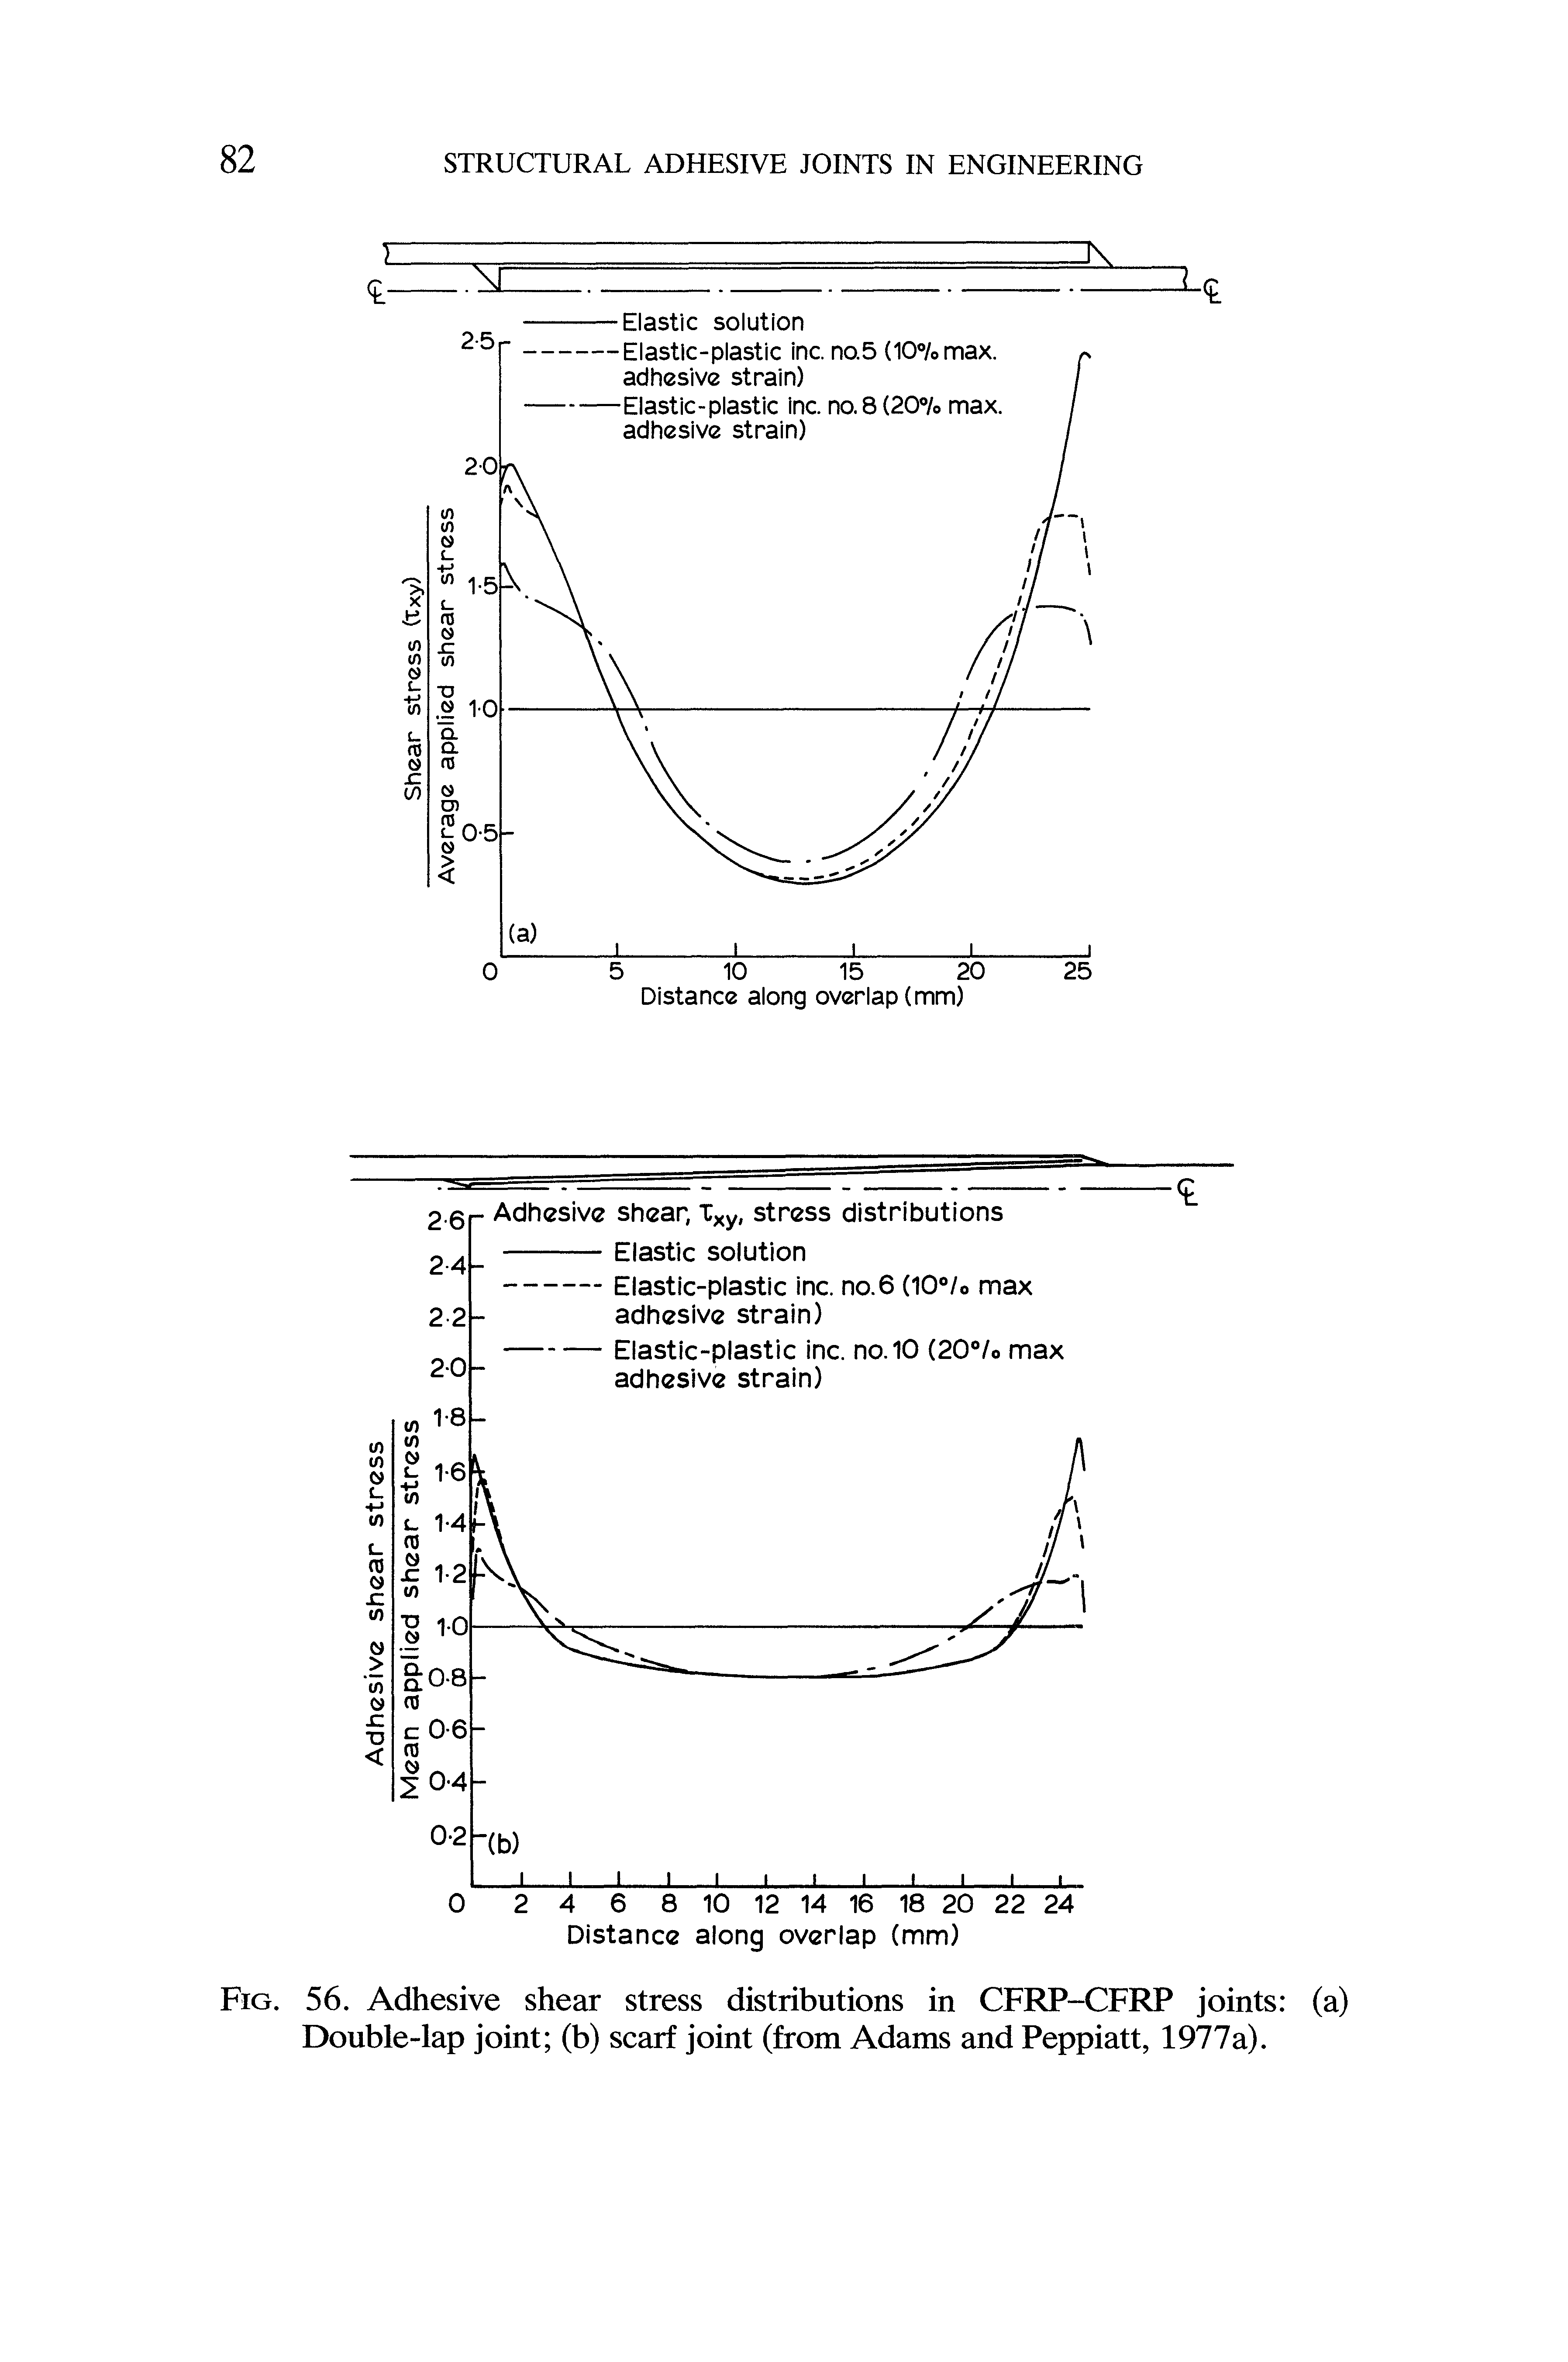 Fig. 56. Adhesive shear stress distributions in CFRP-CFRP joints (a) Double-lap joint (b) scarf joint (from Adams and Peppiatt, 1977a).